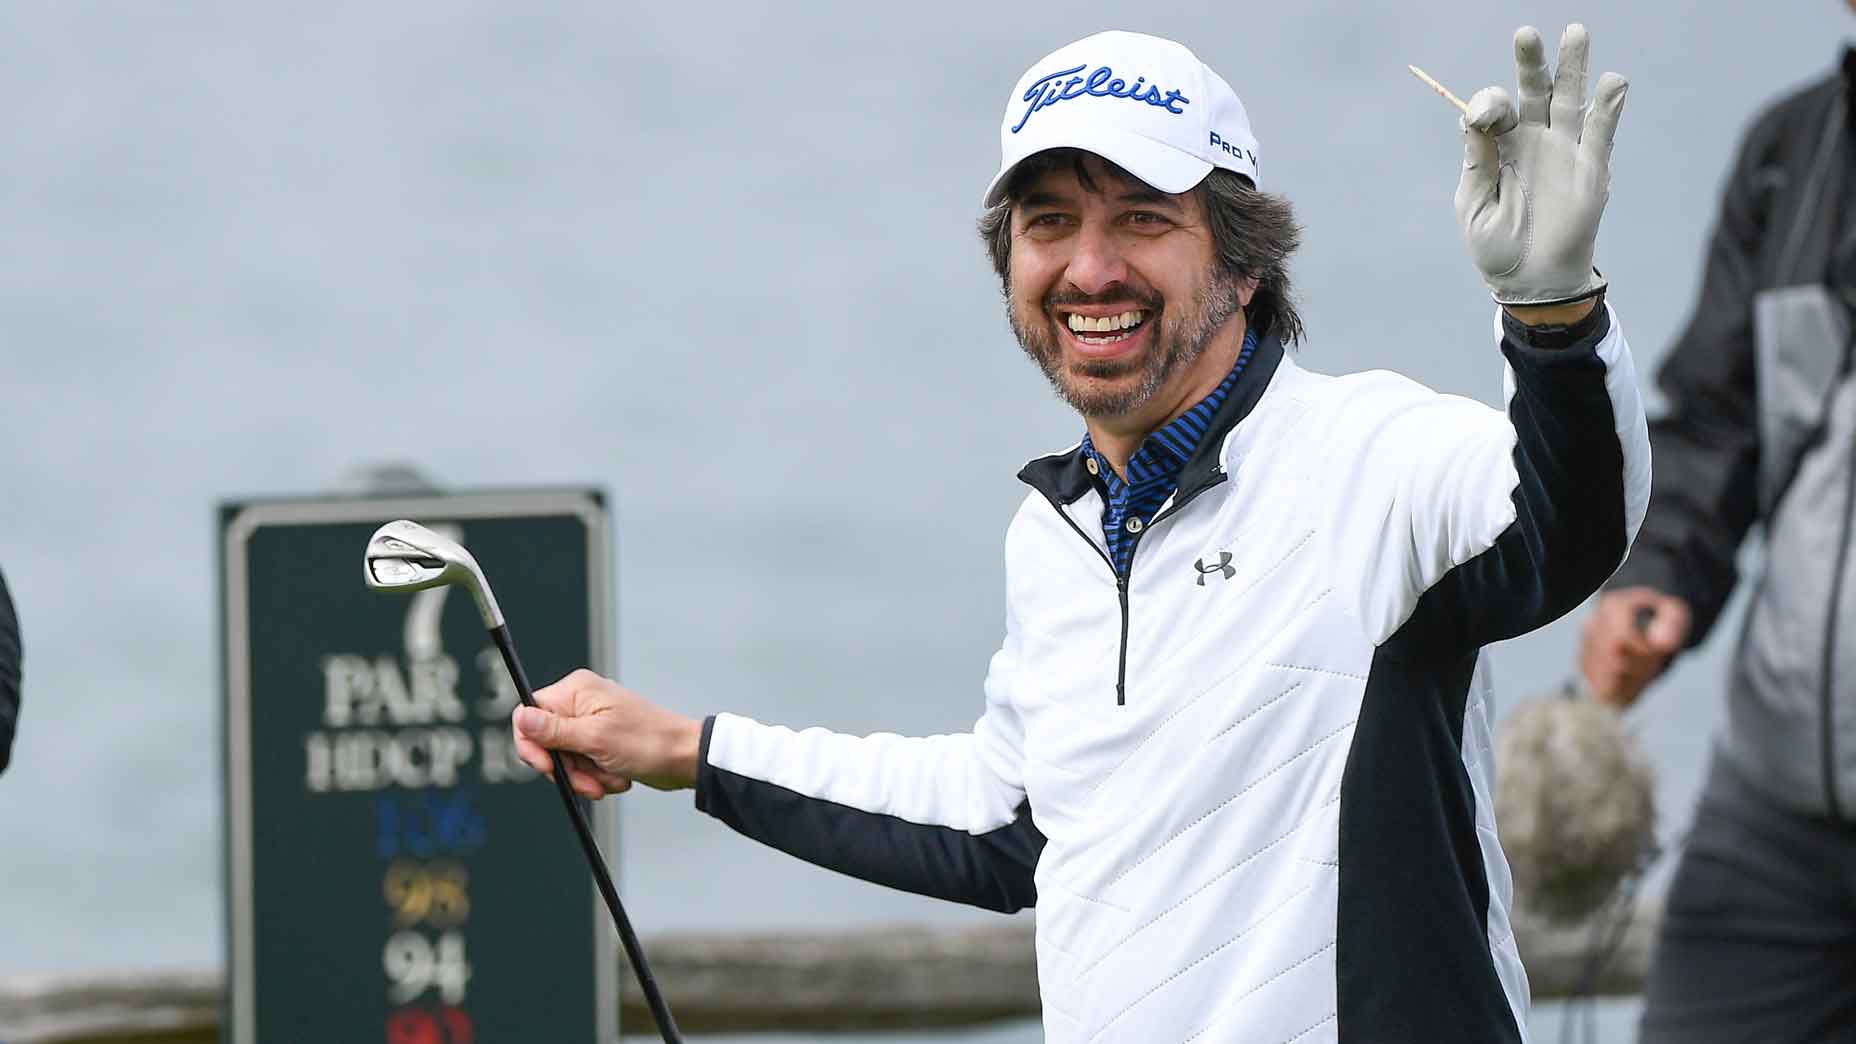 Ray Romano waves to fans on the sixth hole tee box during the third round of the AT&T Pebble Beach Pro-Am at Pebble Beach Golf Links, on February 9, 2019 in Pebble Beach, California.